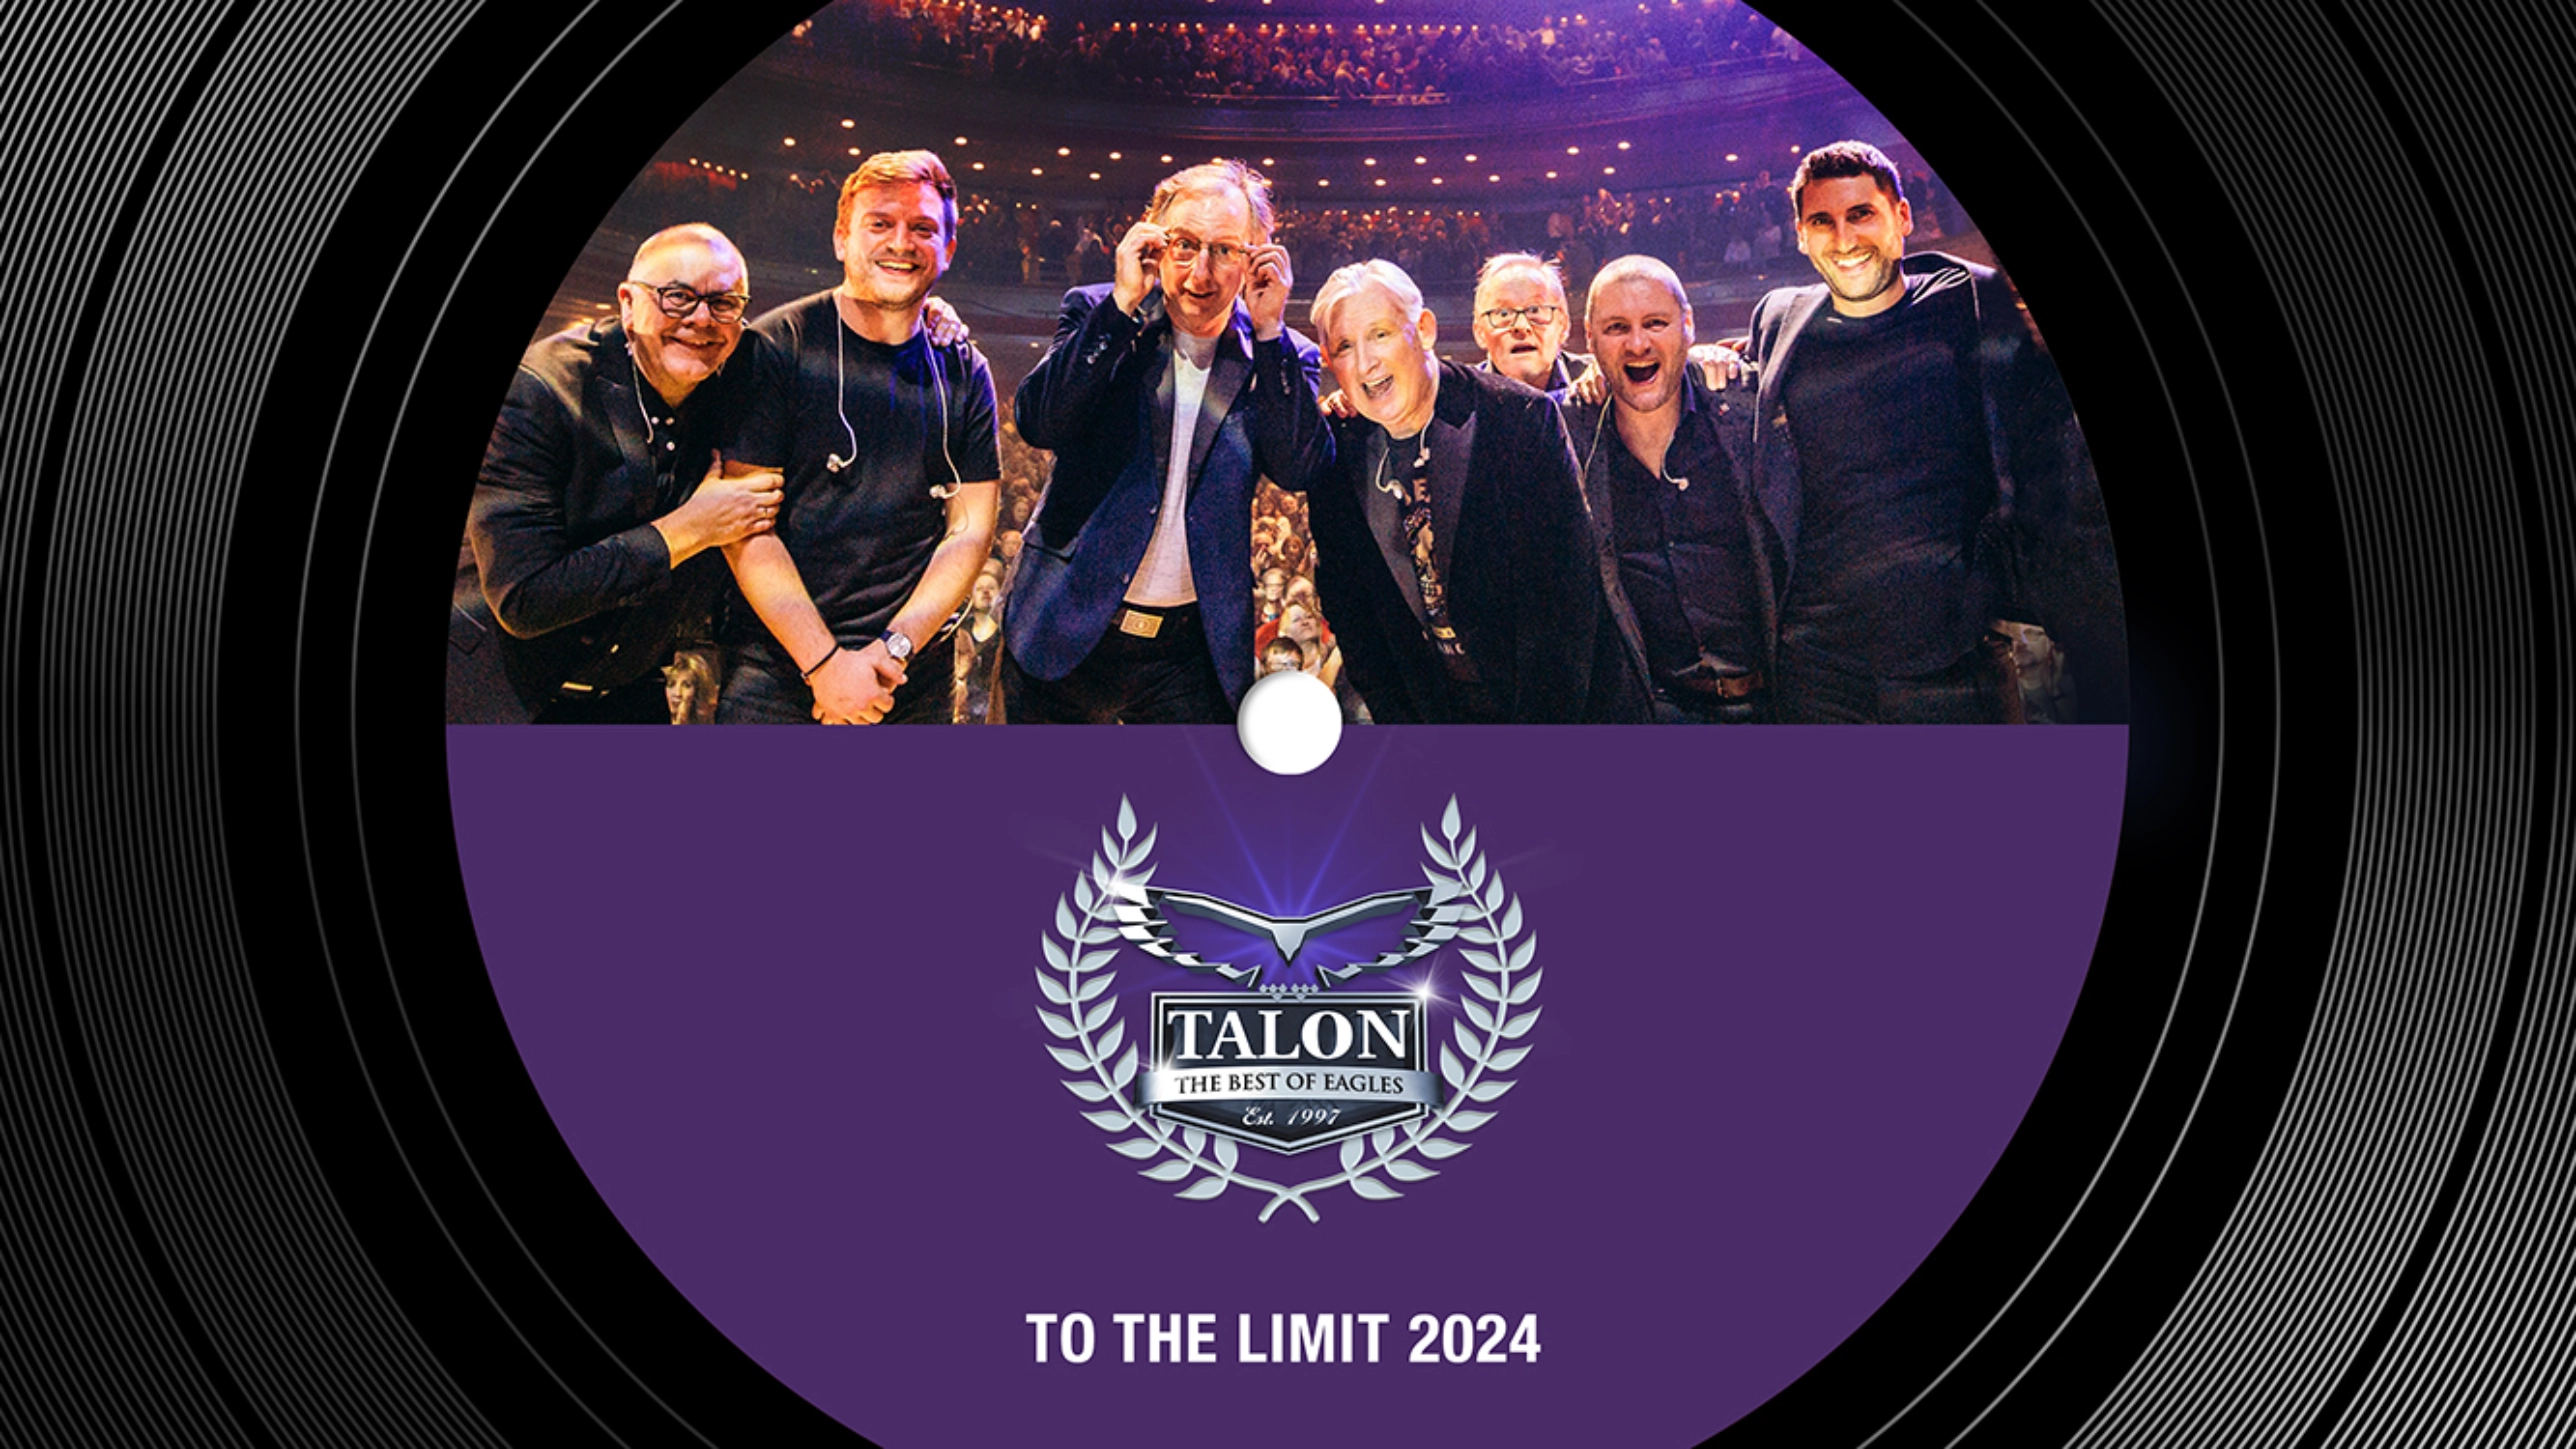 Talon-The Best Of Eagles:To The Limit 2024